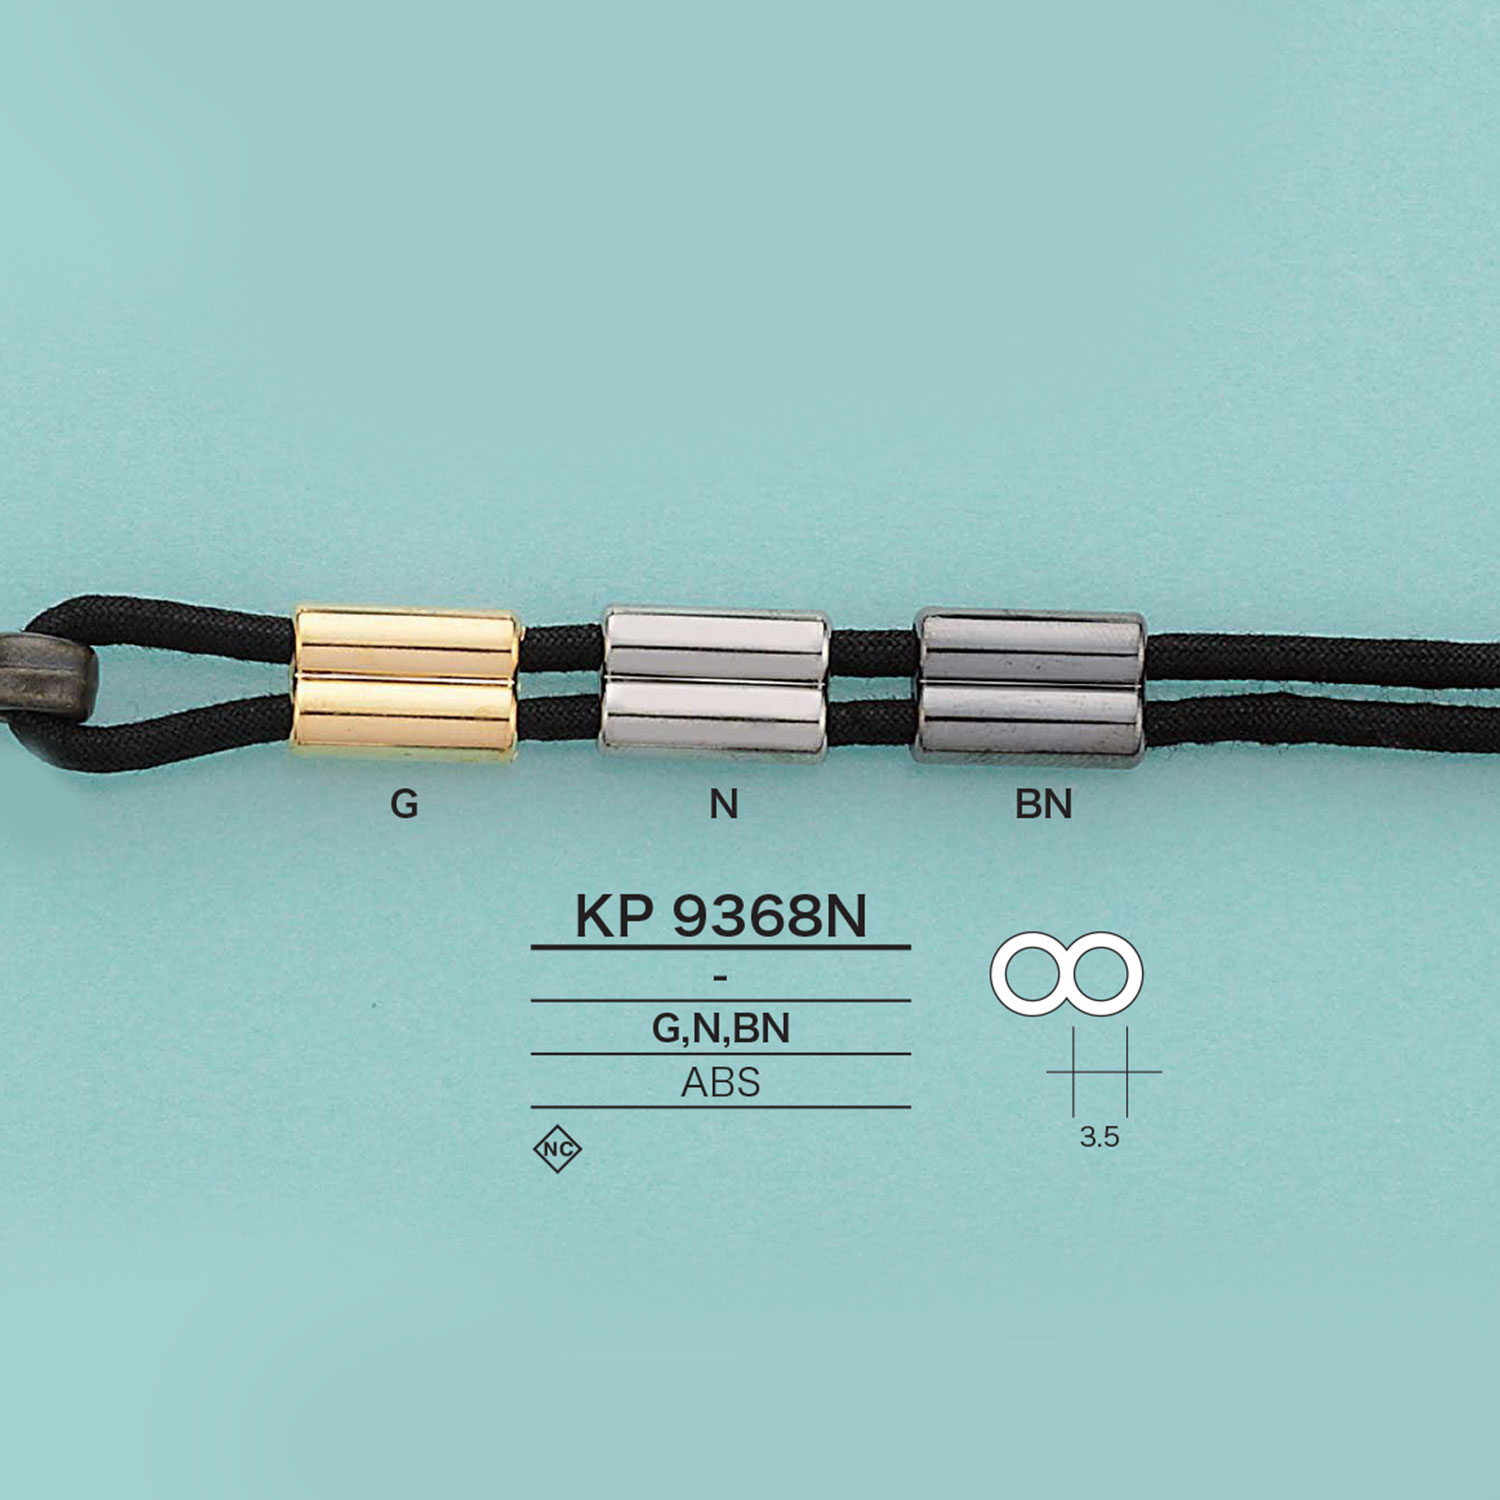 KP9368N Cord Stopper[Buckles And Ring] IRIS